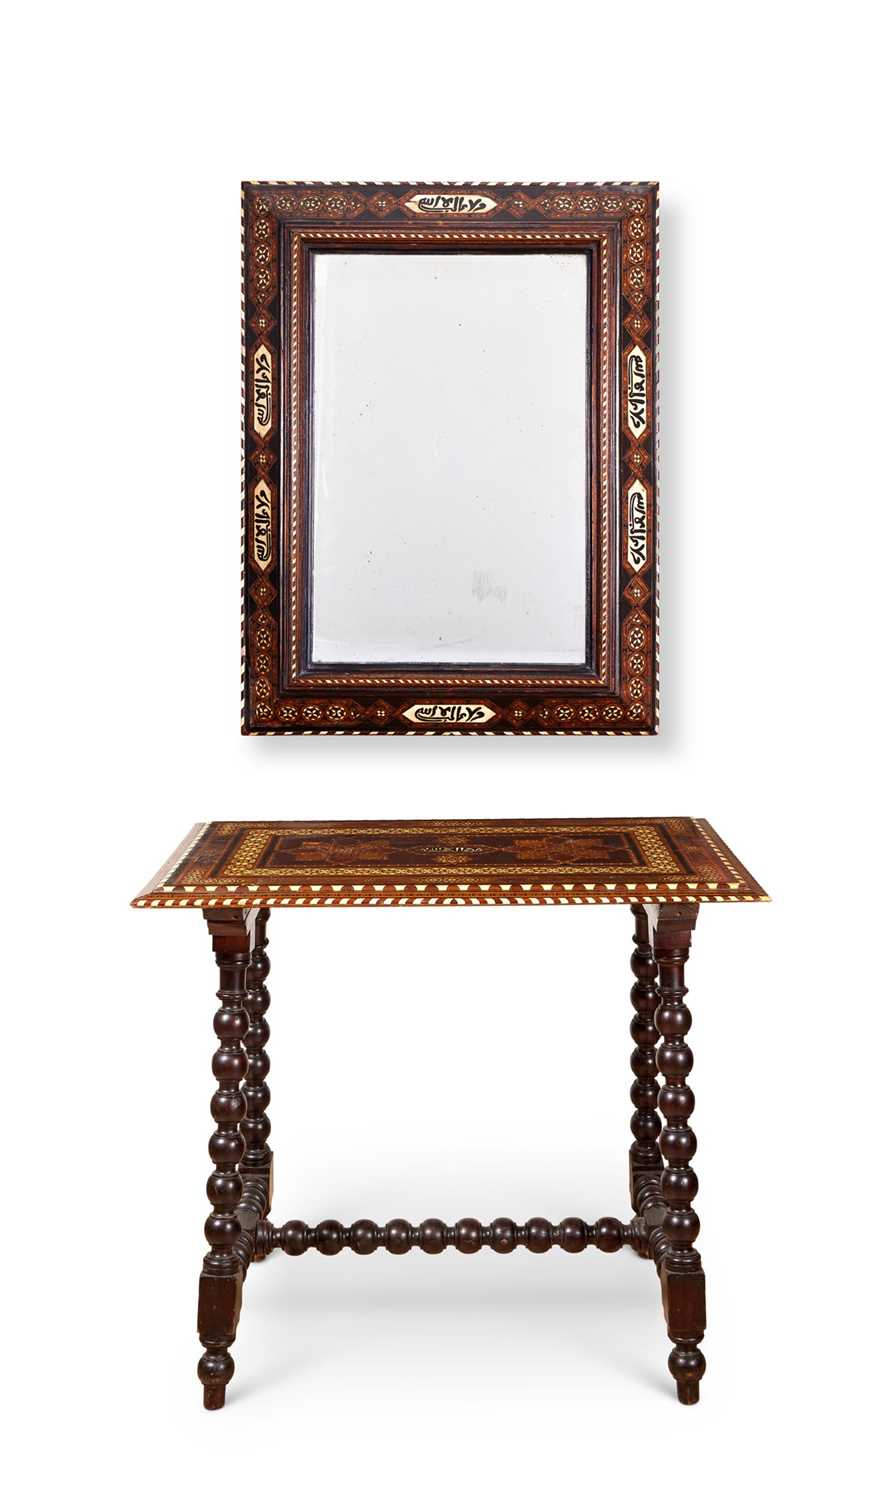 AN EARLY 20TH CENTURY HISPANO MORESQUE BONE INLAID TABLE AND MIRROR